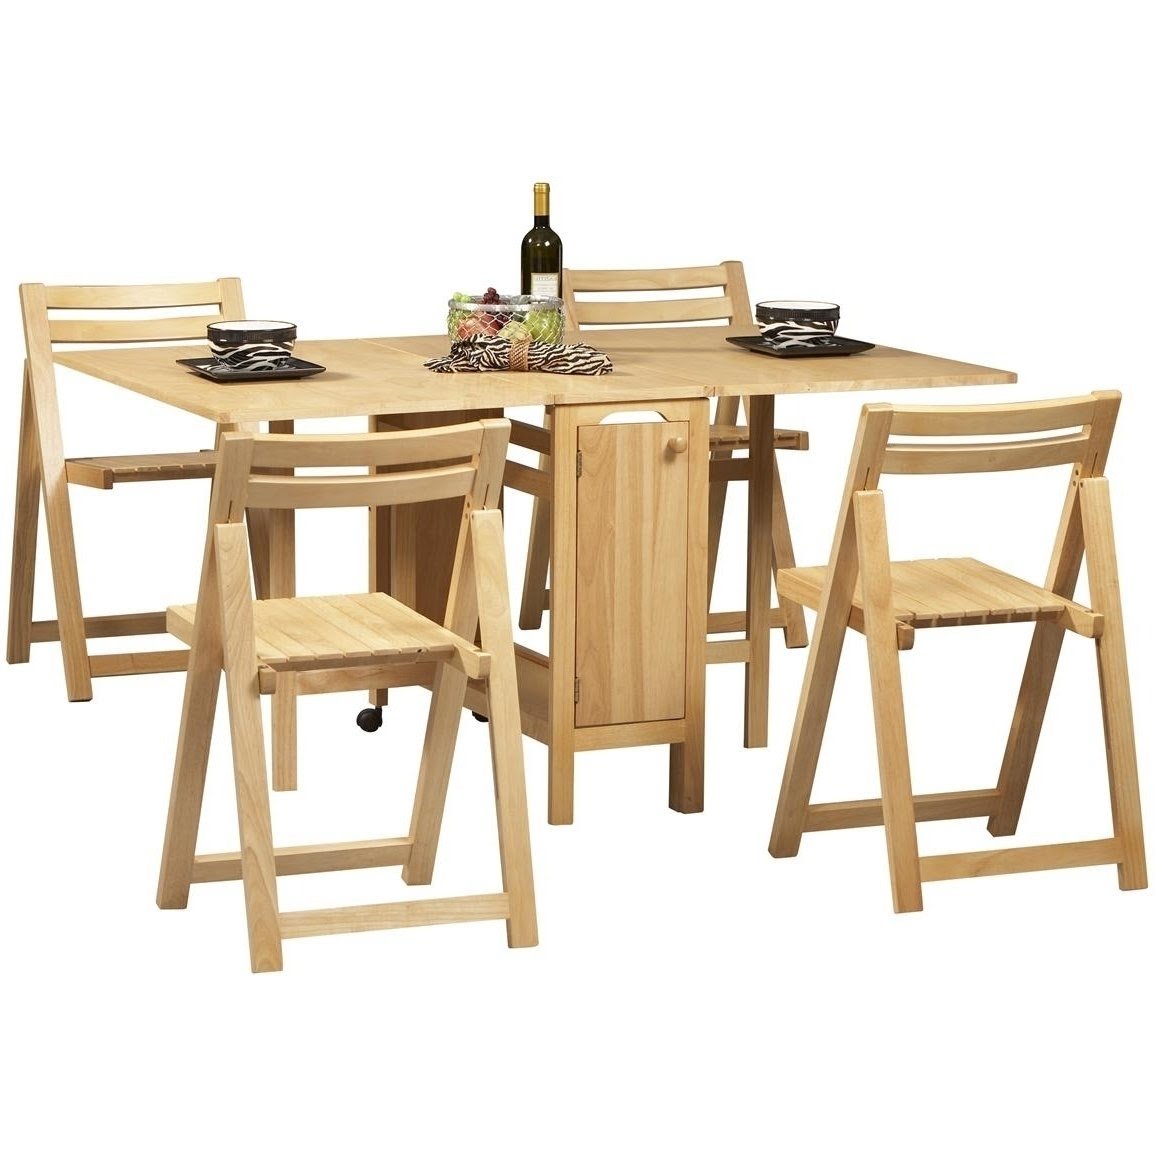 Toy Table And Chairs Set Cheapest Selection, Save 54% | jlcatj.gob.mx